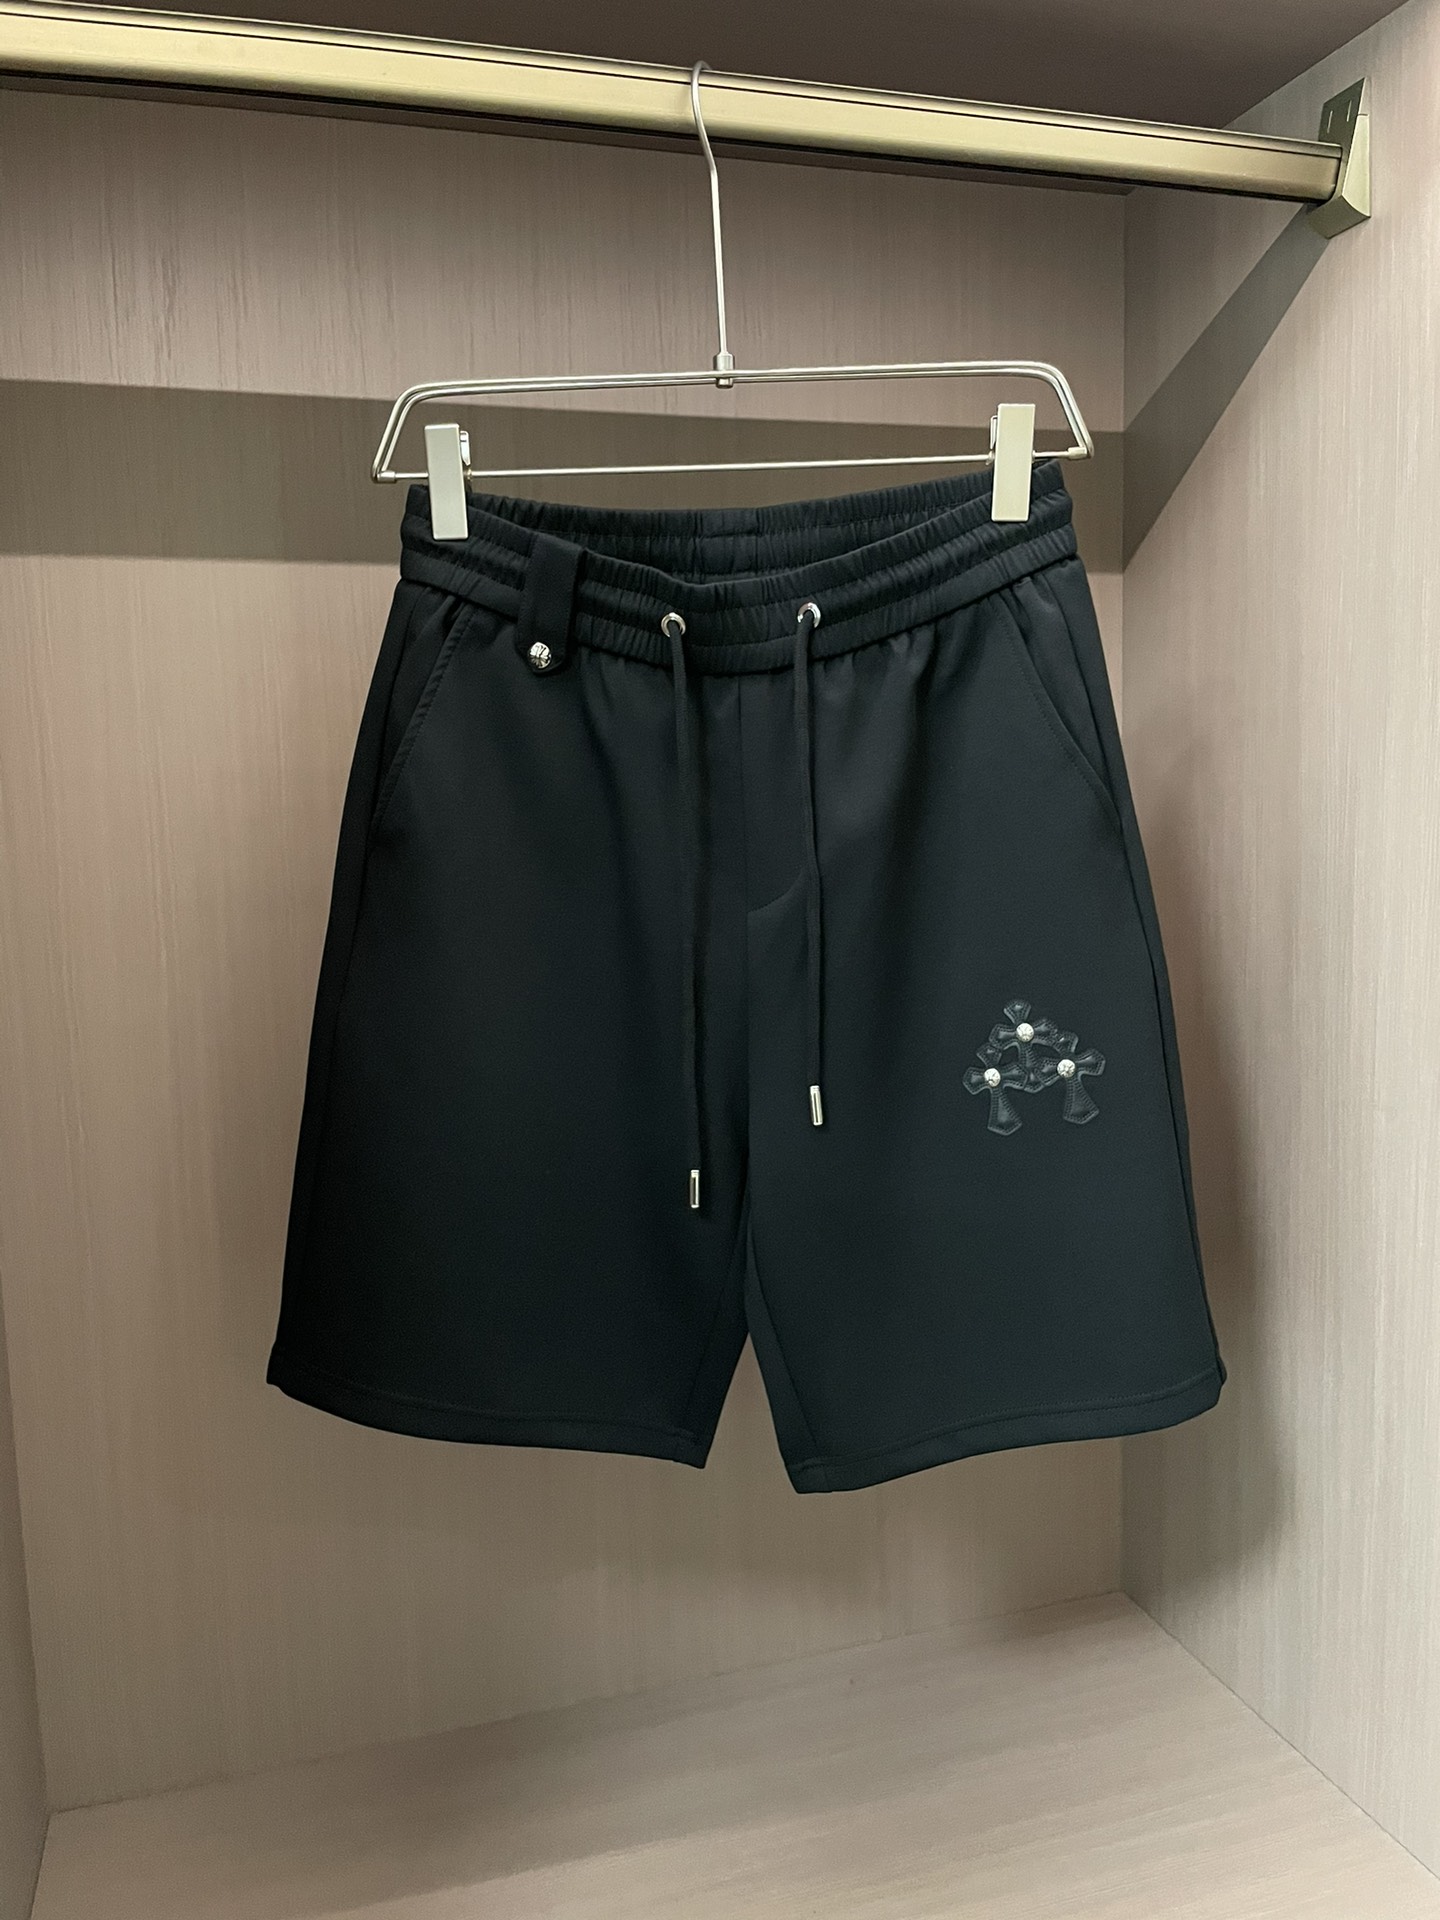 Chrome Hearts Sale
 Clothing Shorts Cotton Knitting Summer Collection Casual